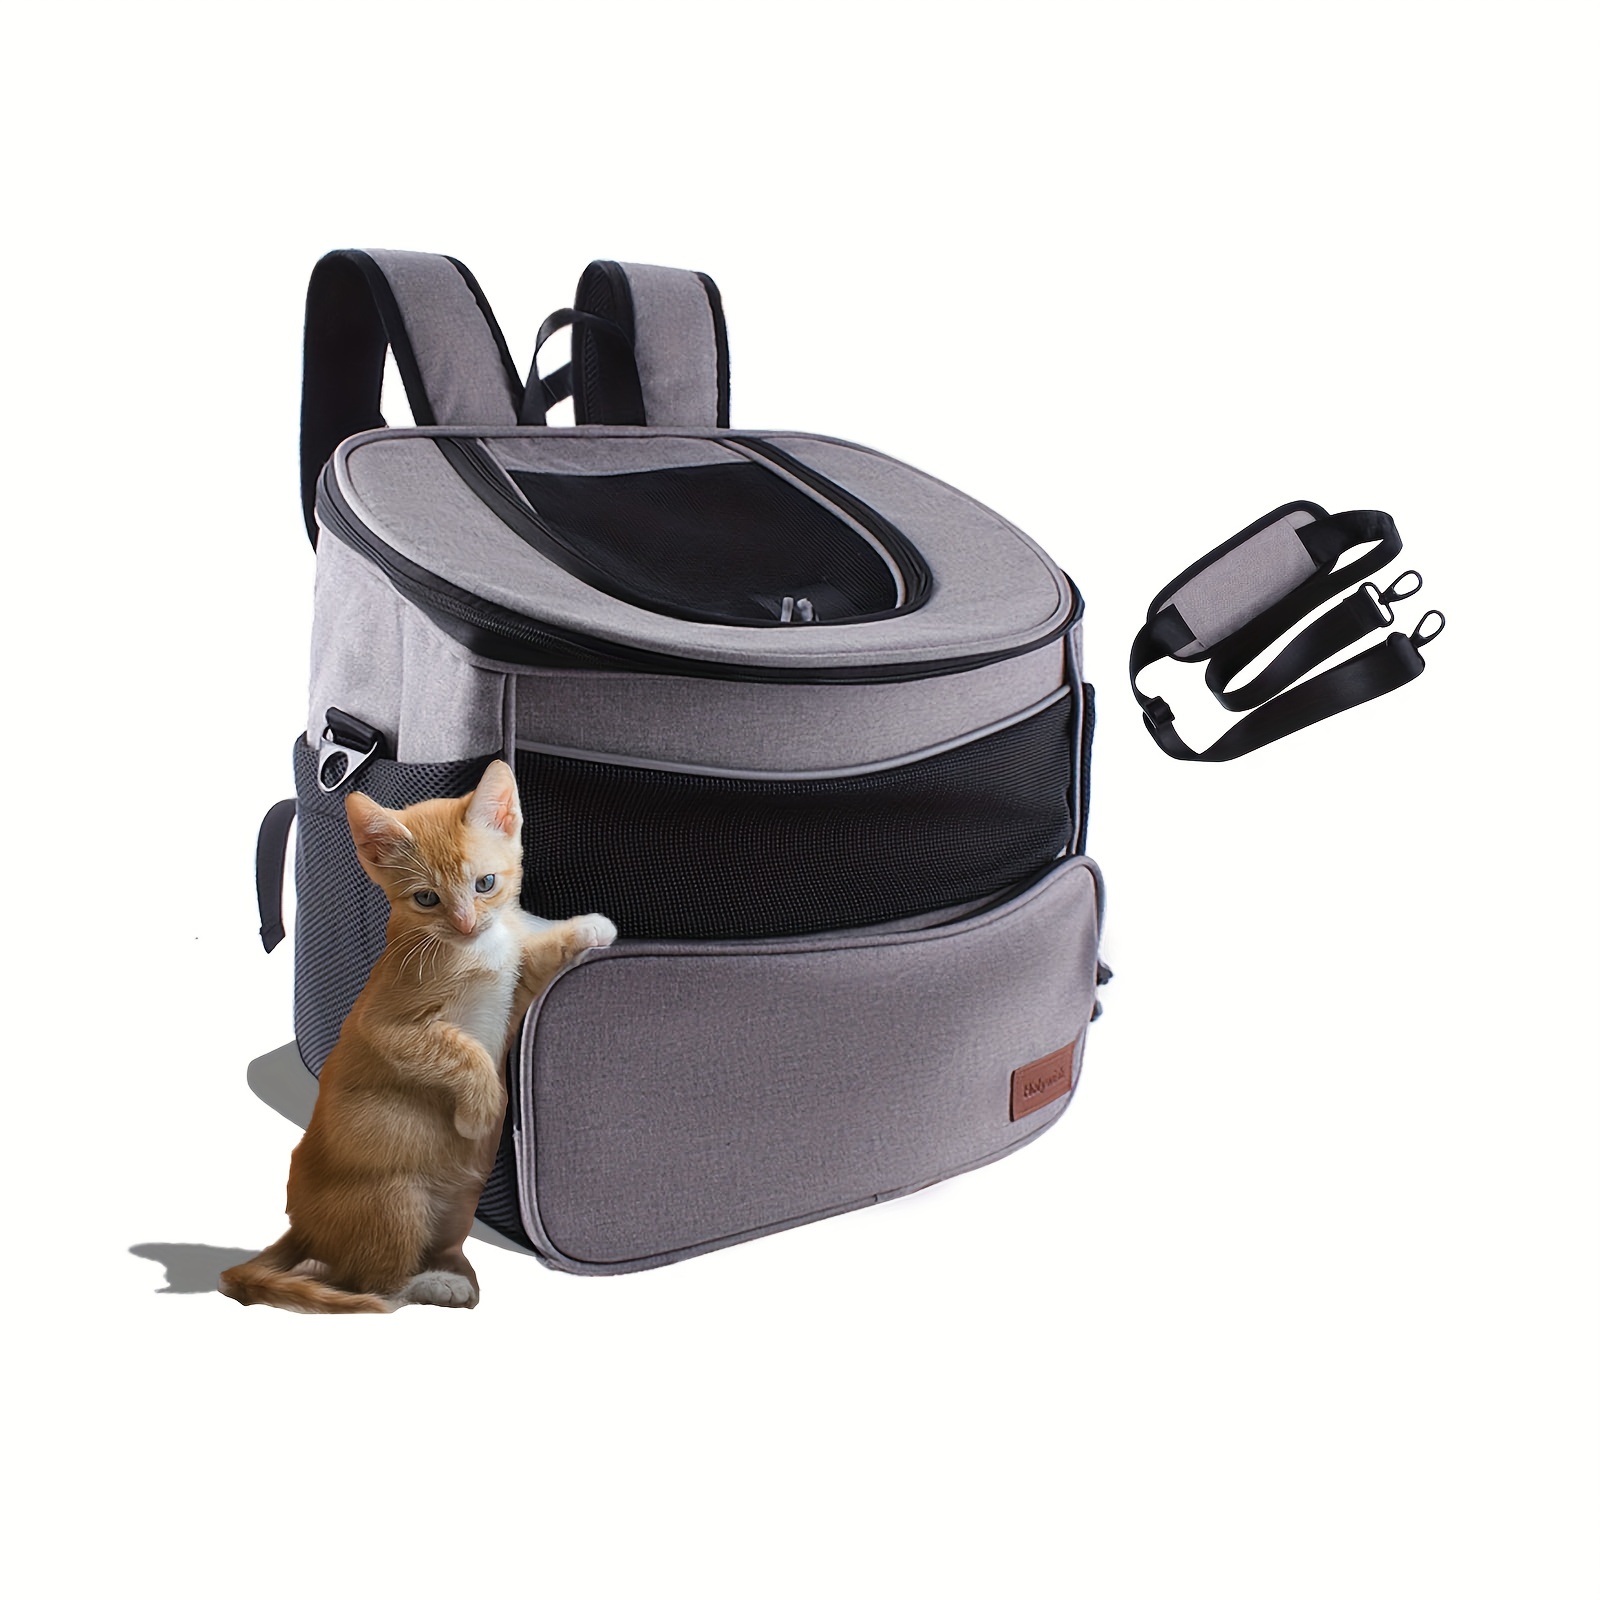 Pet trolley case out portable transparent cat and dog bag pet backpack